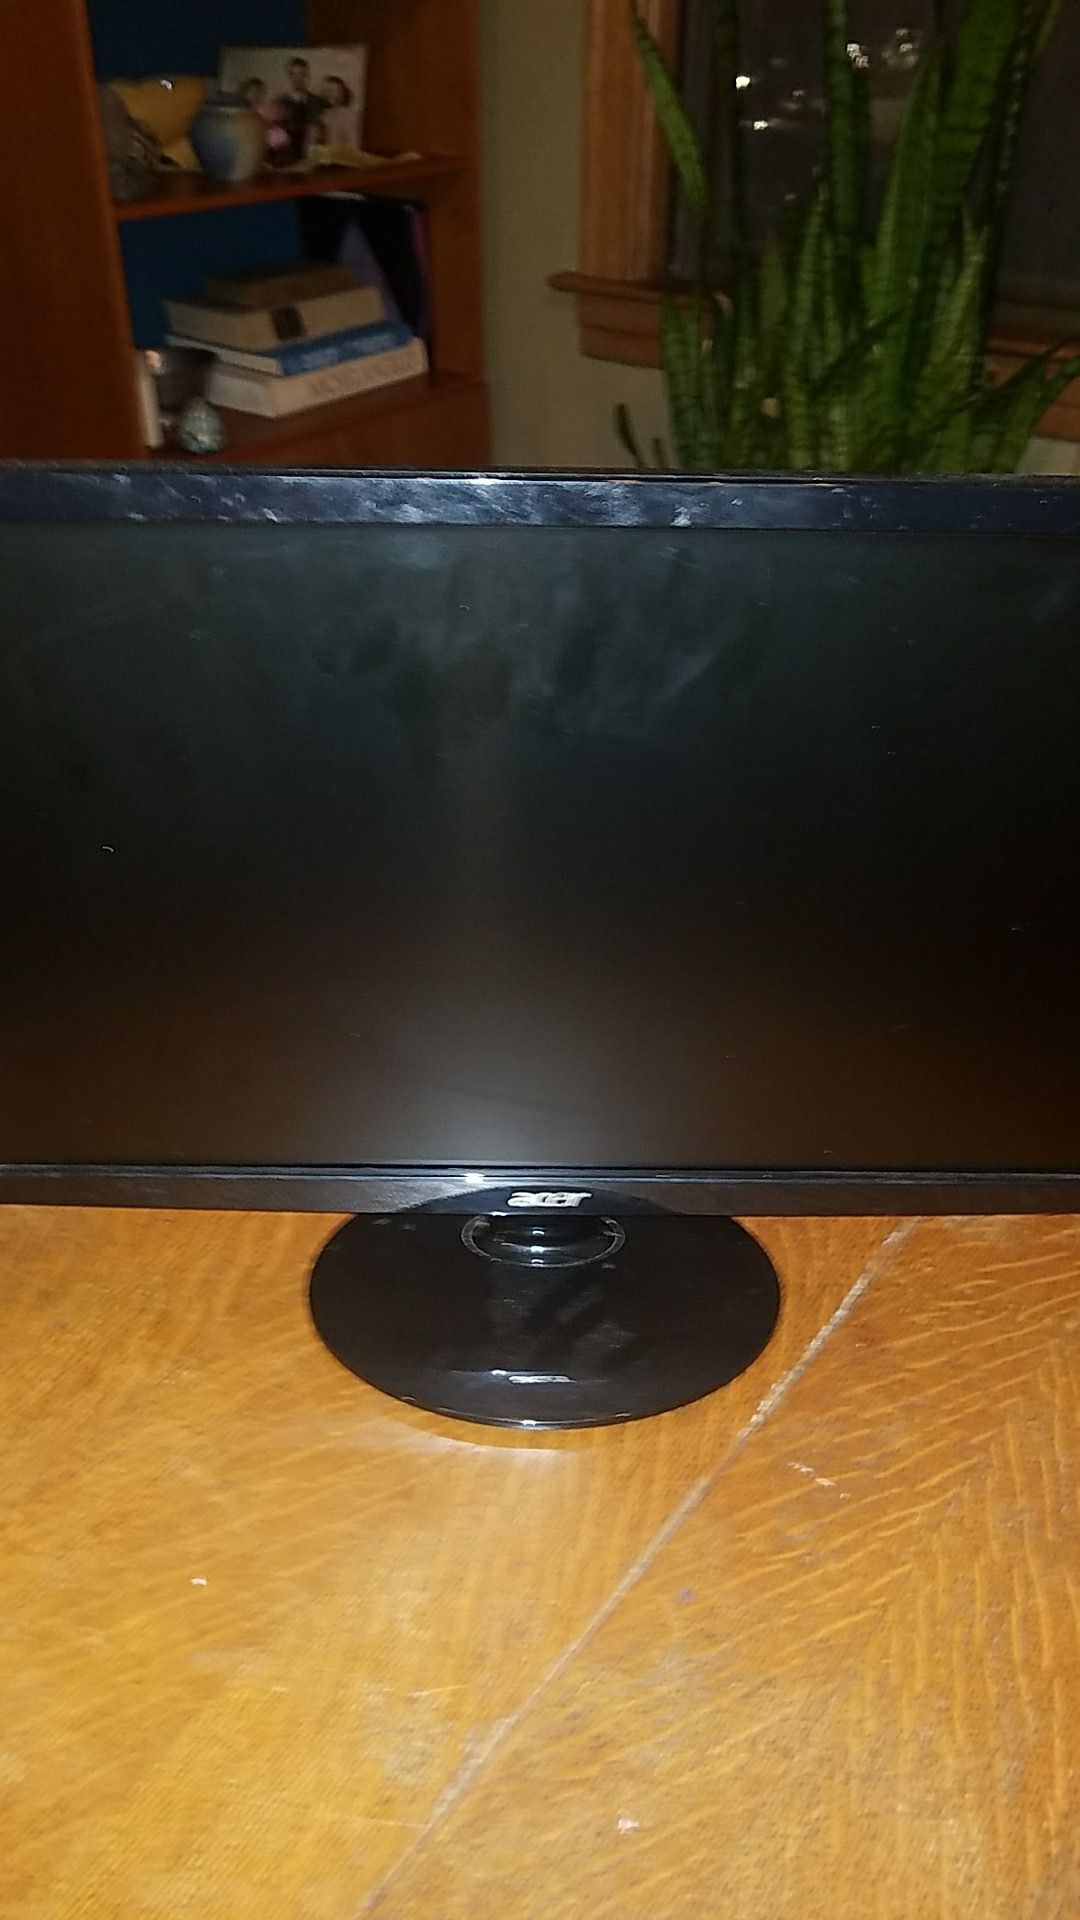 Accer computer monitor